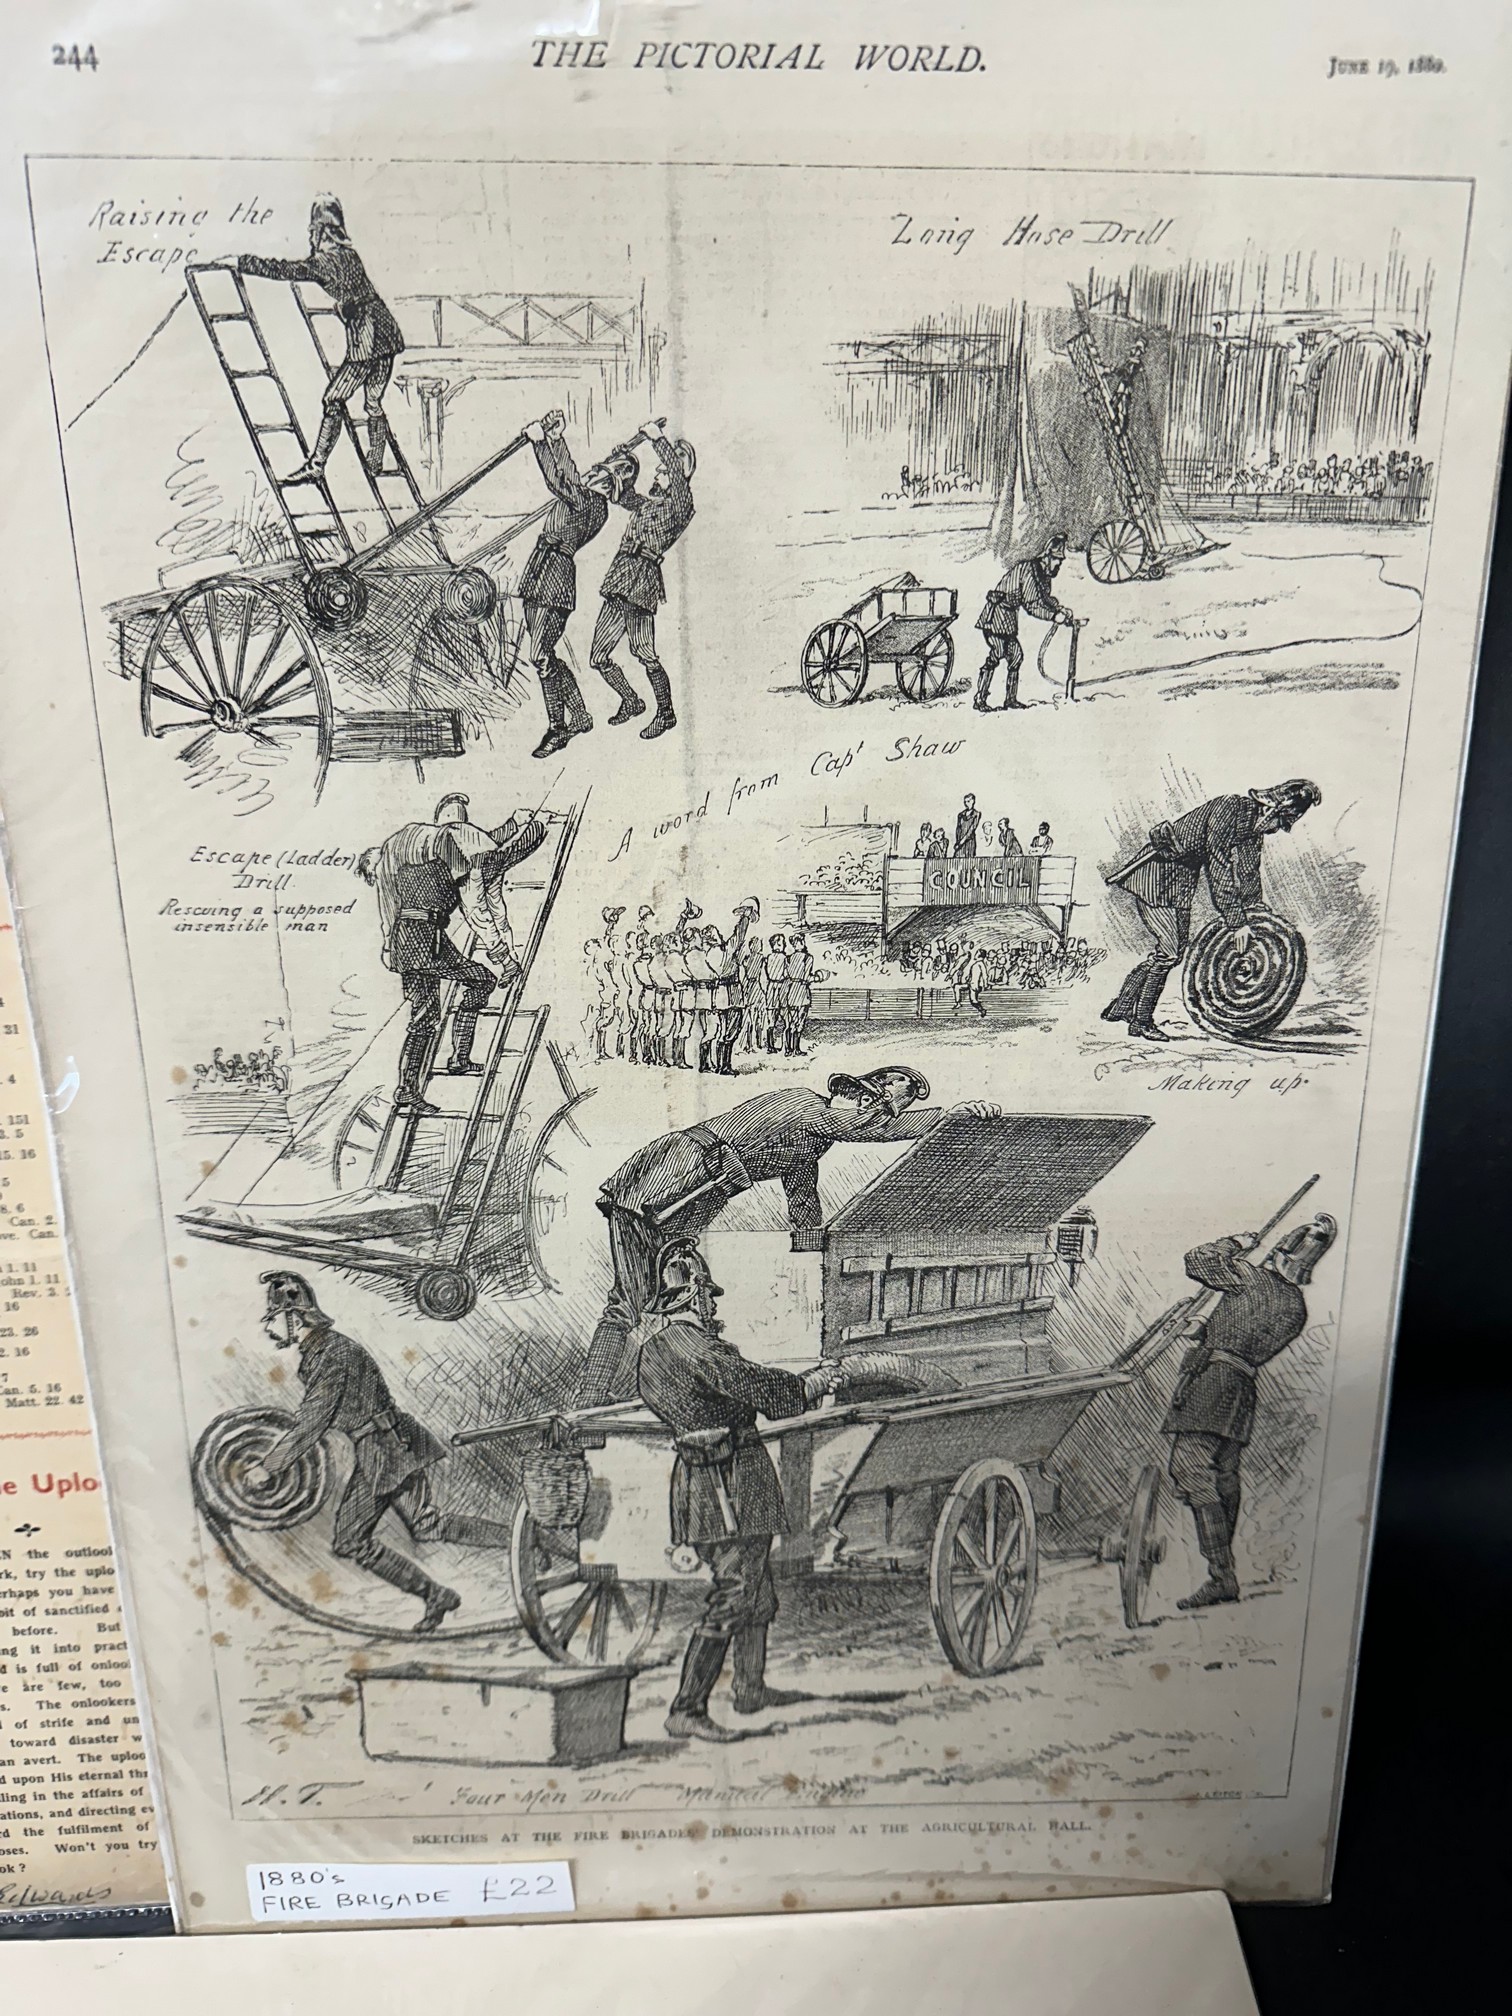 Fire Brigade lot - a 1940 Fireman's Almanar - four pages, facts and pictures ref. London Fire - Image 5 of 6